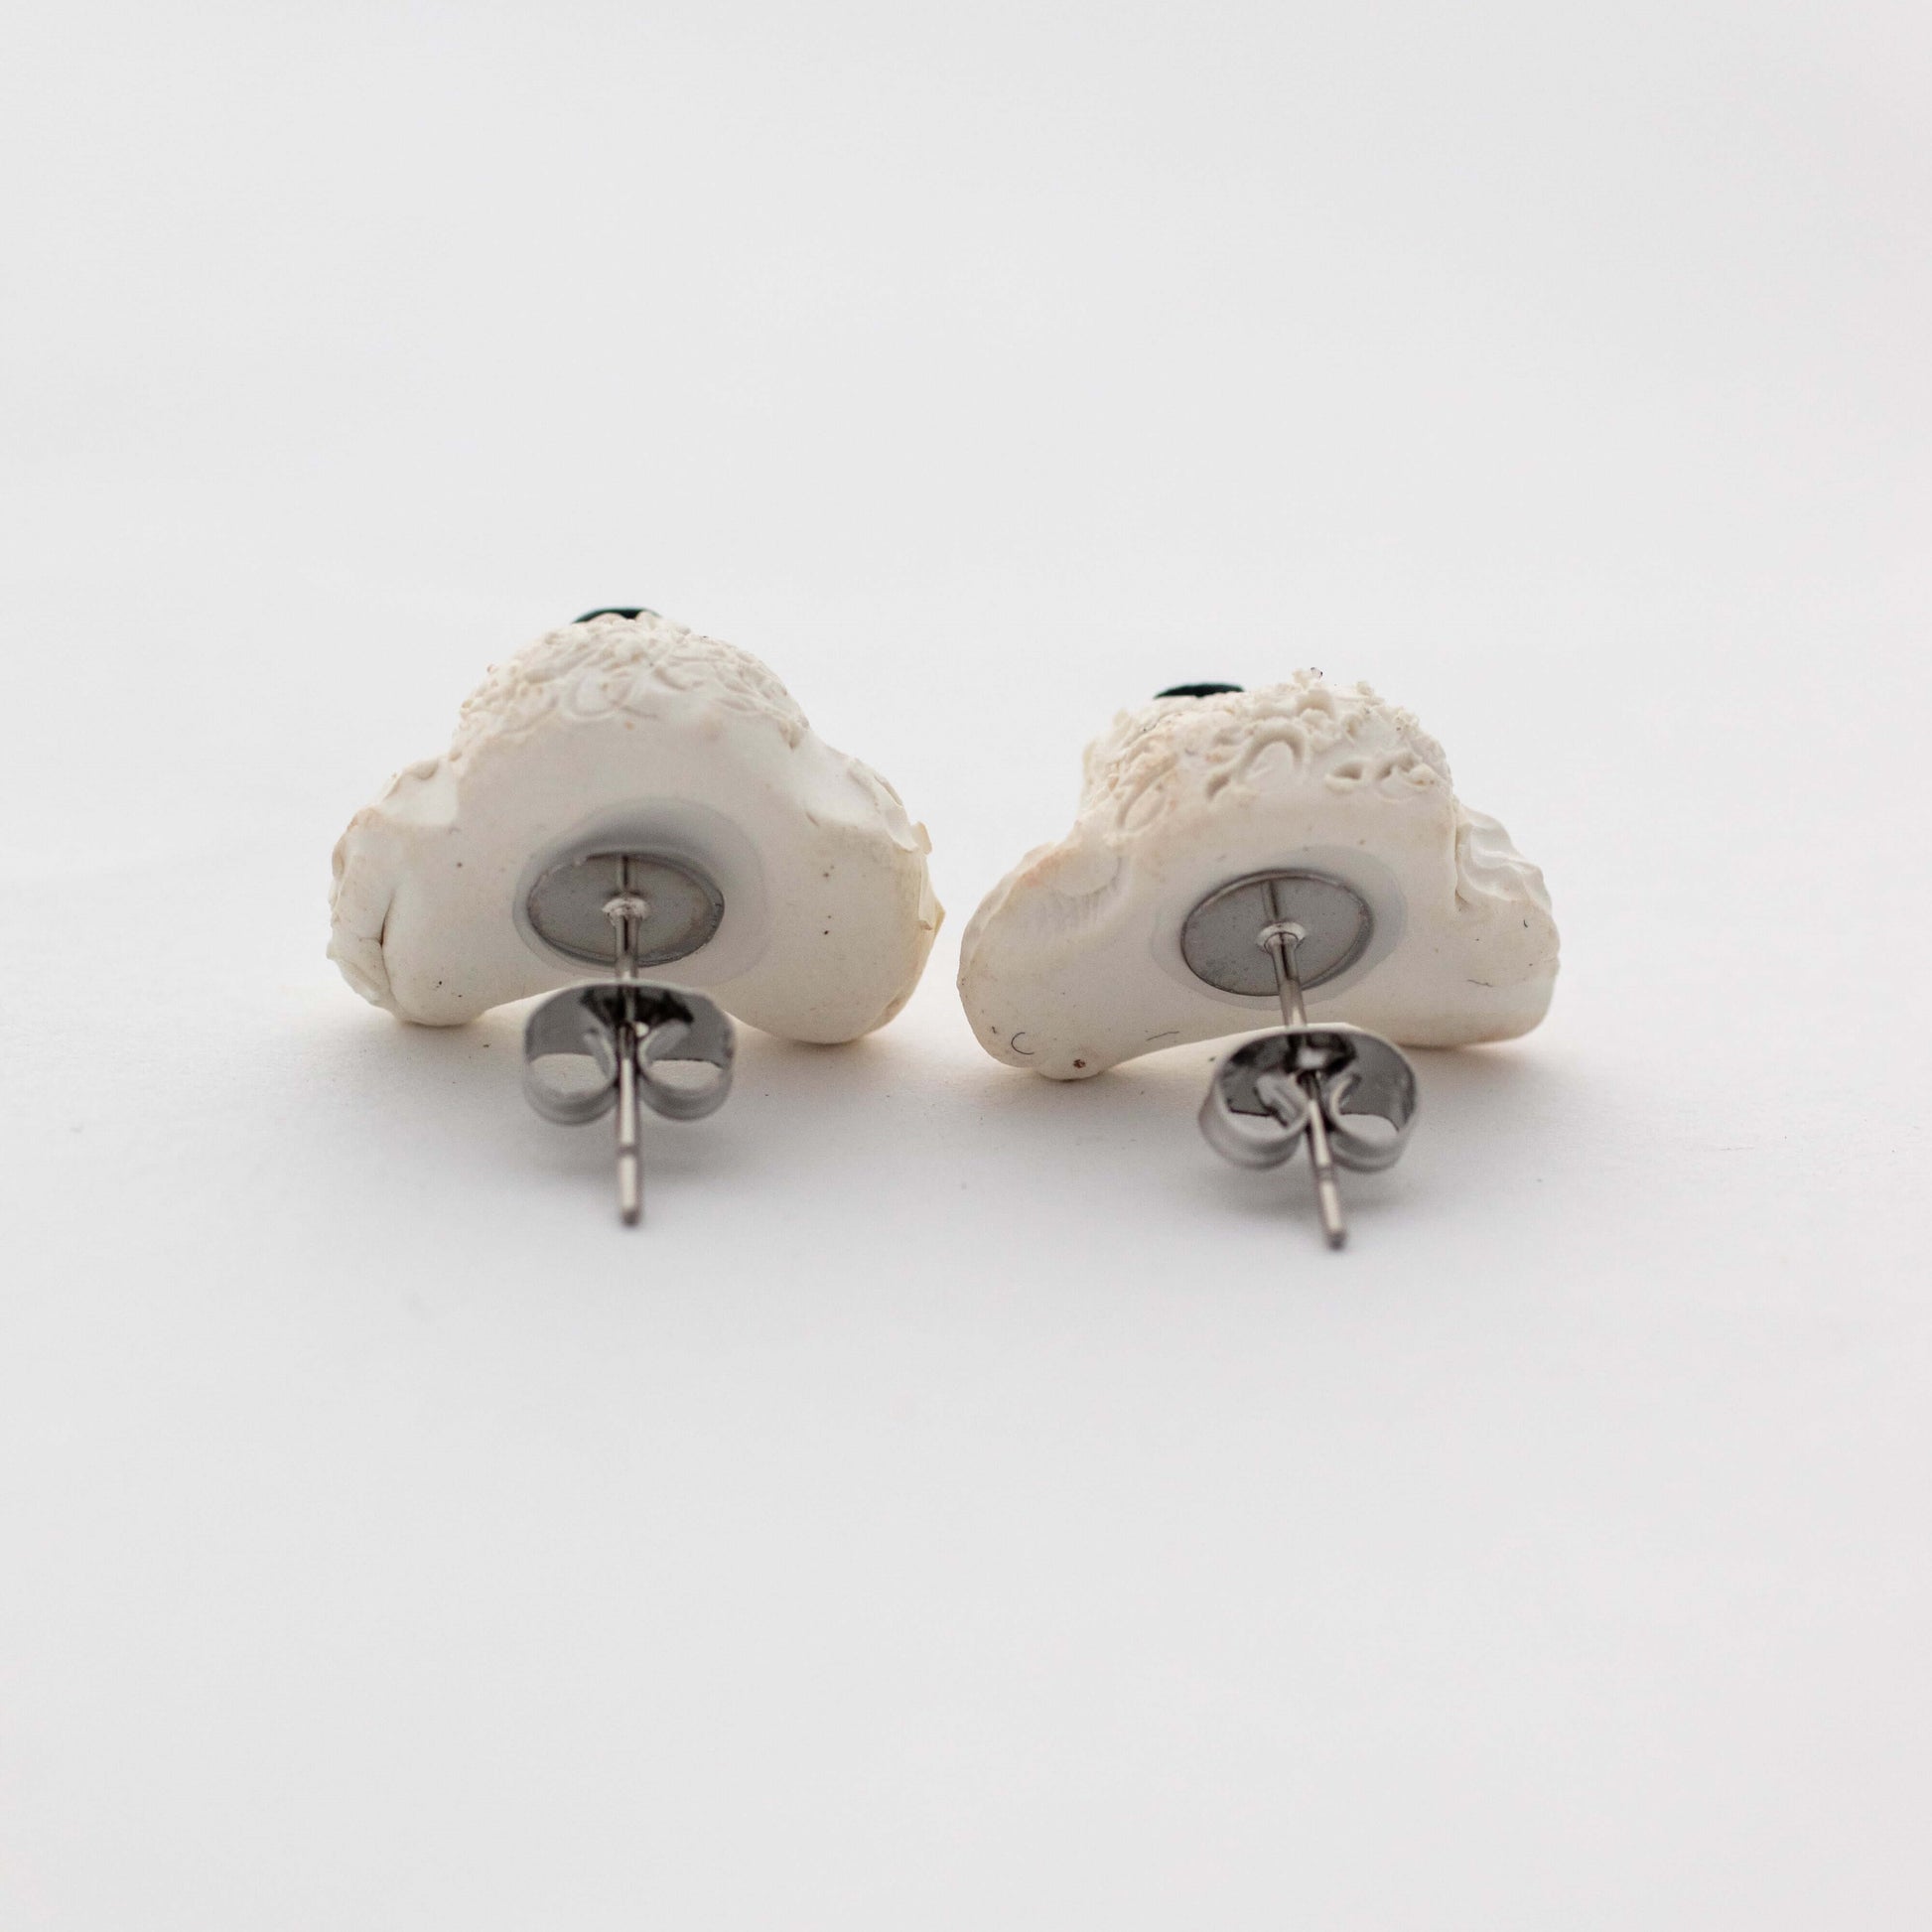 Handmade polymer clay white poodle stud earrings showing surgical steel backs